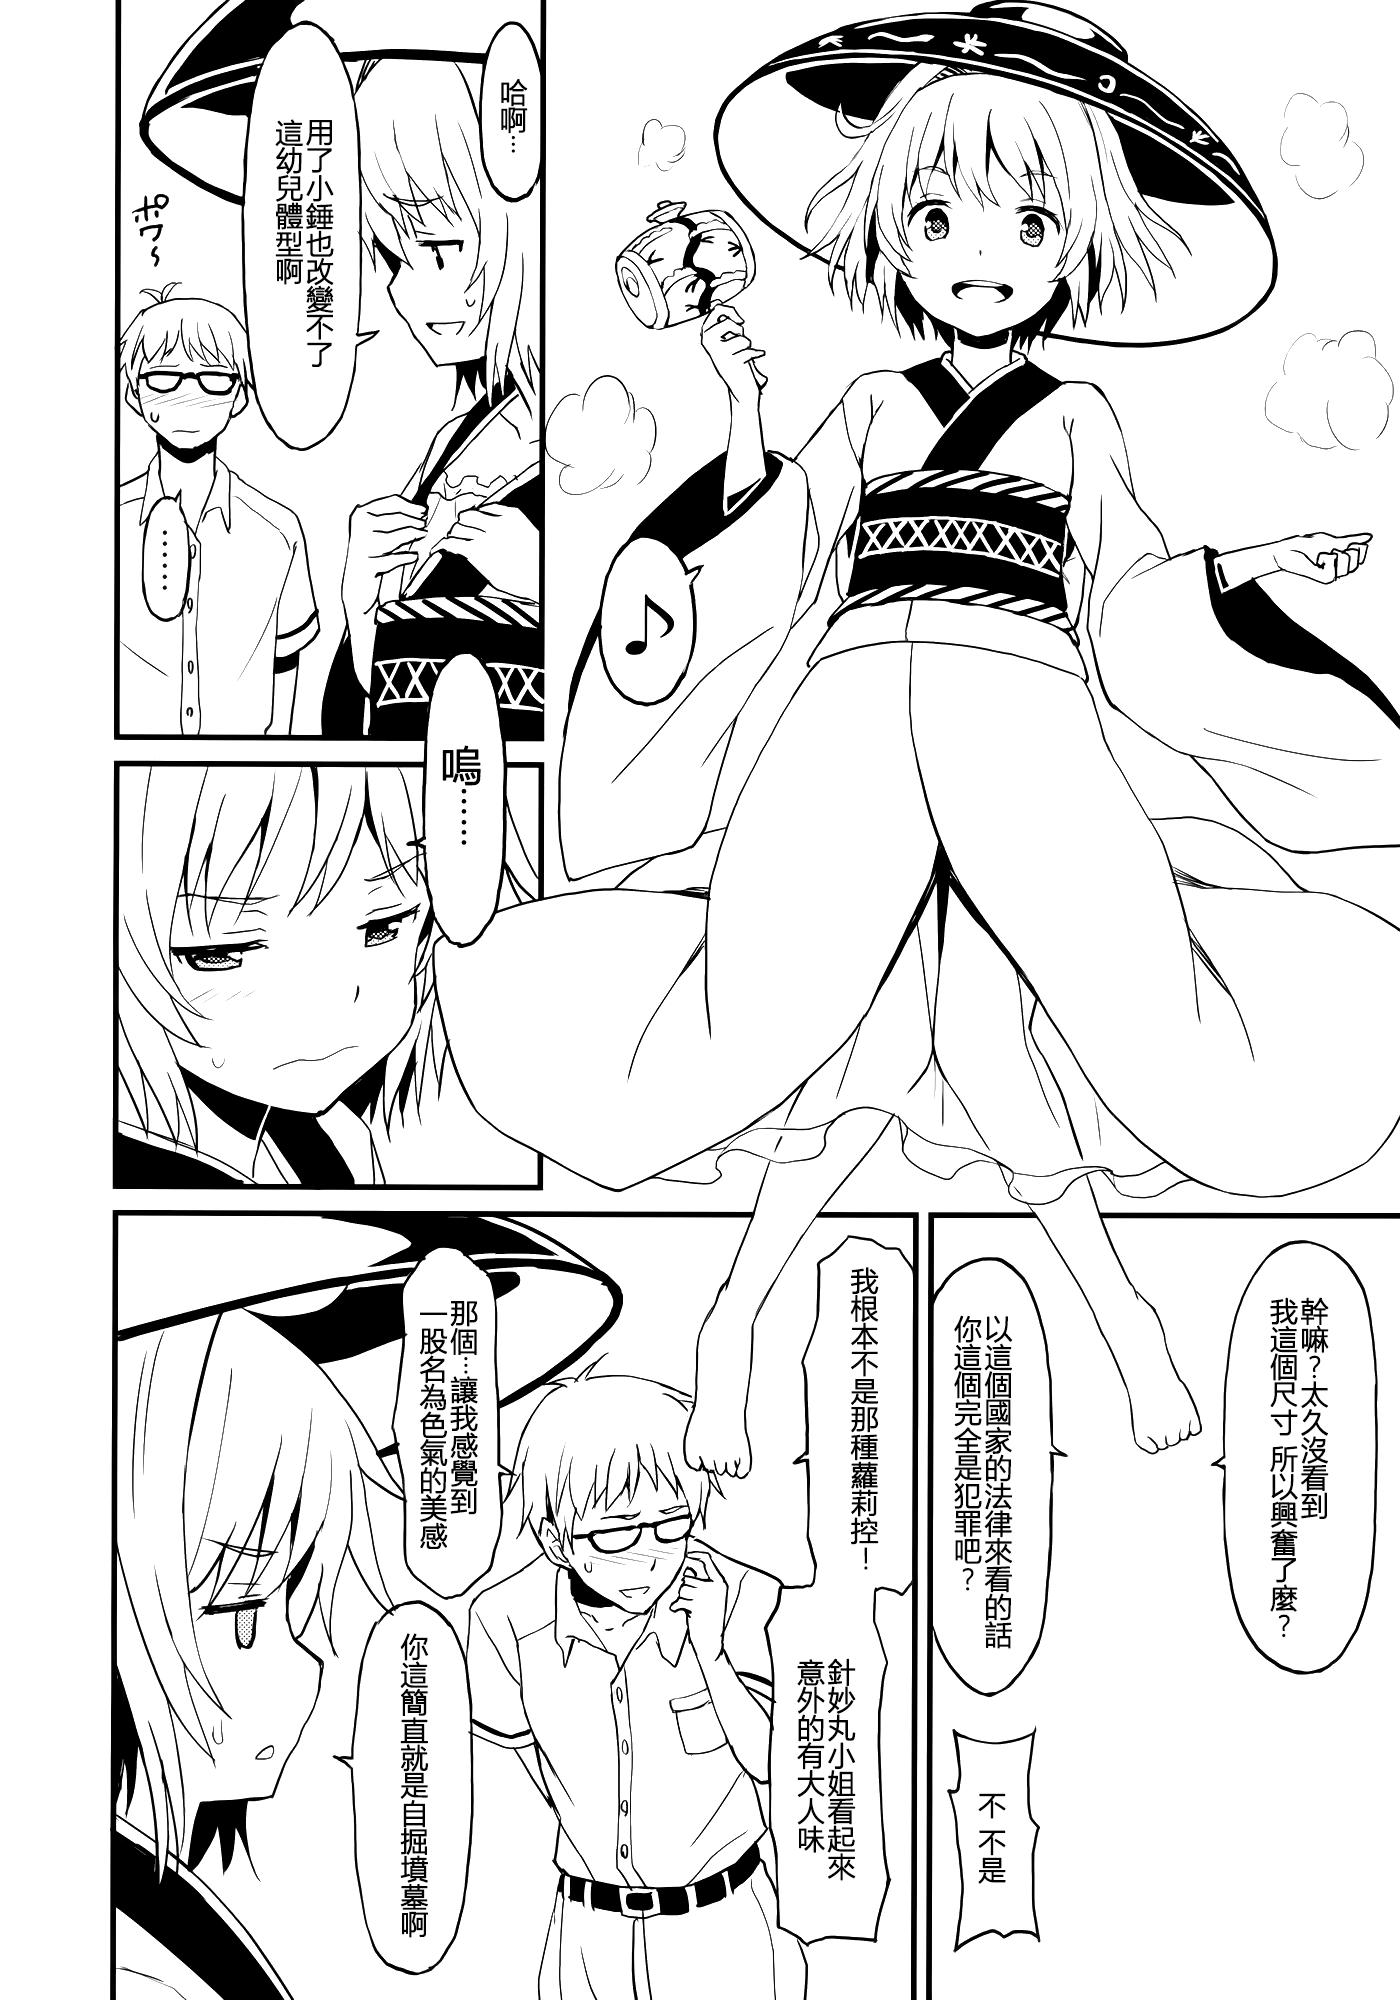 Perverted Chiisana Seesaw Lovers - Touhou project Sucking Cock - Page 6